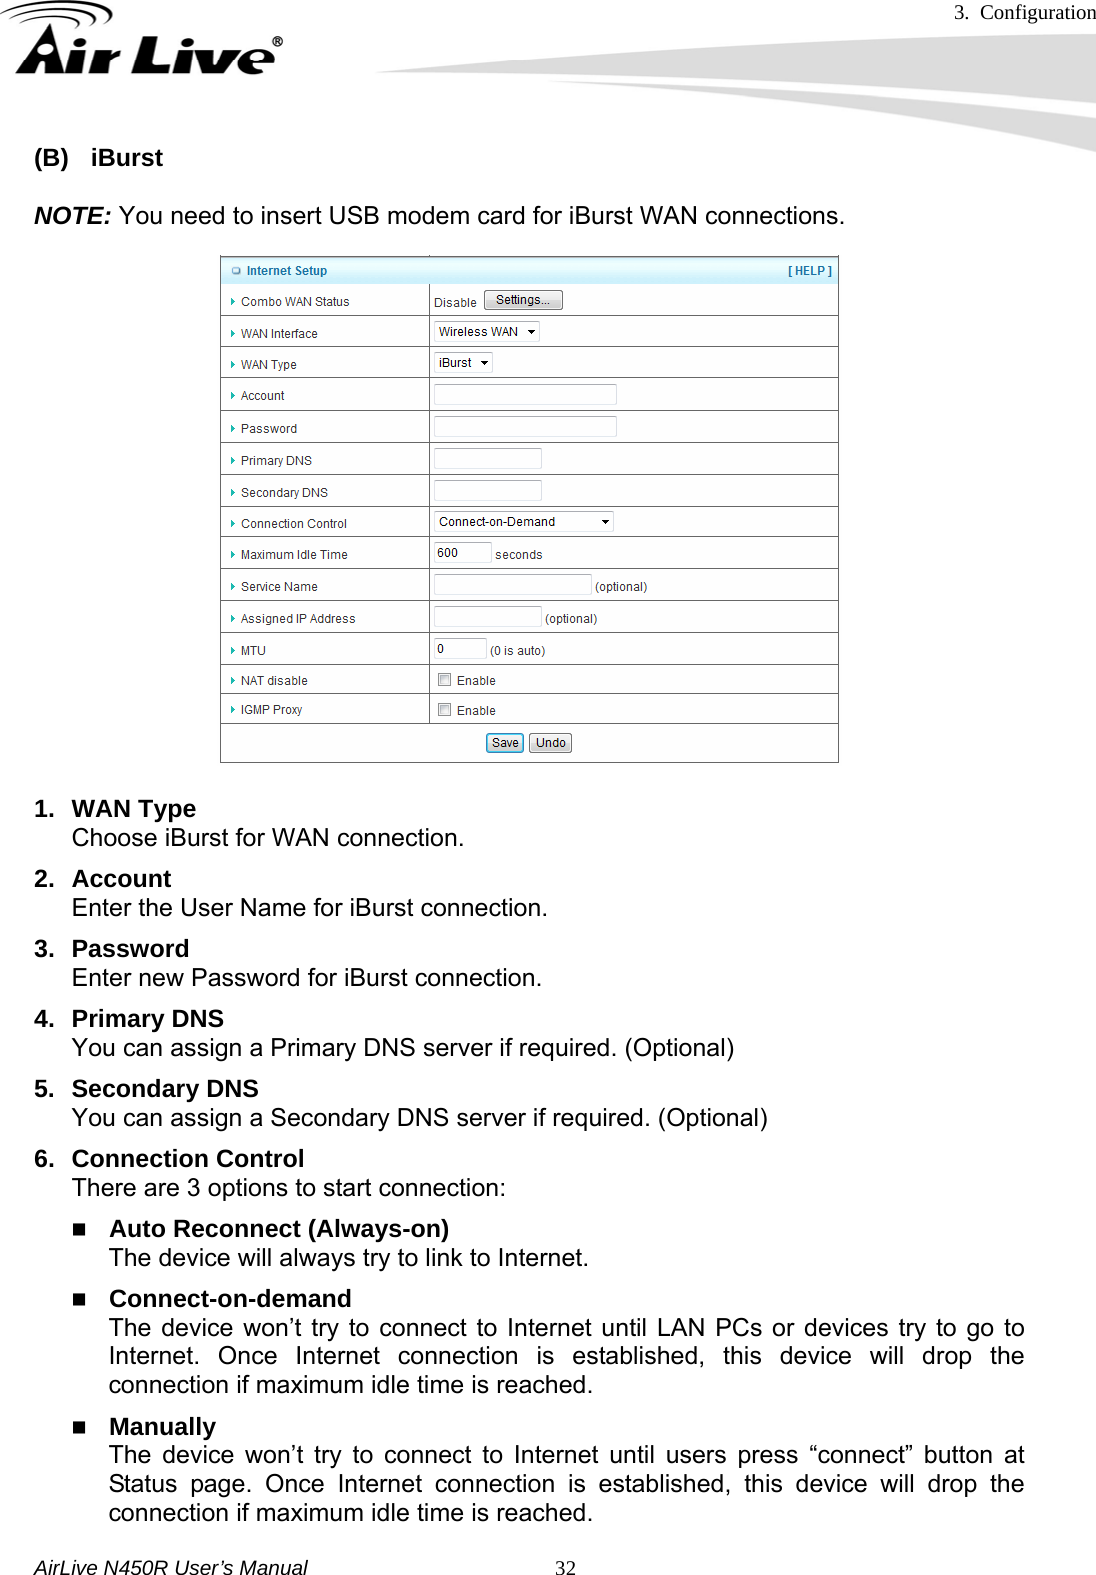 3. Configuration     AirLive N450R User’s Manual   32(B) iBurst  NOTE: You need to insert USB modem card for iBurst WAN connections.  1. WAN Type Choose iBurst for WAN connection. 2. Account Enter the User Name for iBurst connection. 3. Password Enter new Password for iBurst connection. 4. Primary DNS You can assign a Primary DNS server if required. (Optional) 5. Secondary DNS You can assign a Secondary DNS server if required. (Optional) 6. Connection Control There are 3 options to start connection:    Auto Reconnect (Always-on) The device will always try to link to Internet.  Connect-on-demand The device won’t try to connect to Internet until LAN PCs or devices try to go to Internet. Once Internet connection is established, this device will drop the connection if maximum idle time is reached.  Manually The device won’t try to connect to Internet until users press “connect” button at Status page. Once Internet connection is established, this device will drop the connection if maximum idle time is reached. 